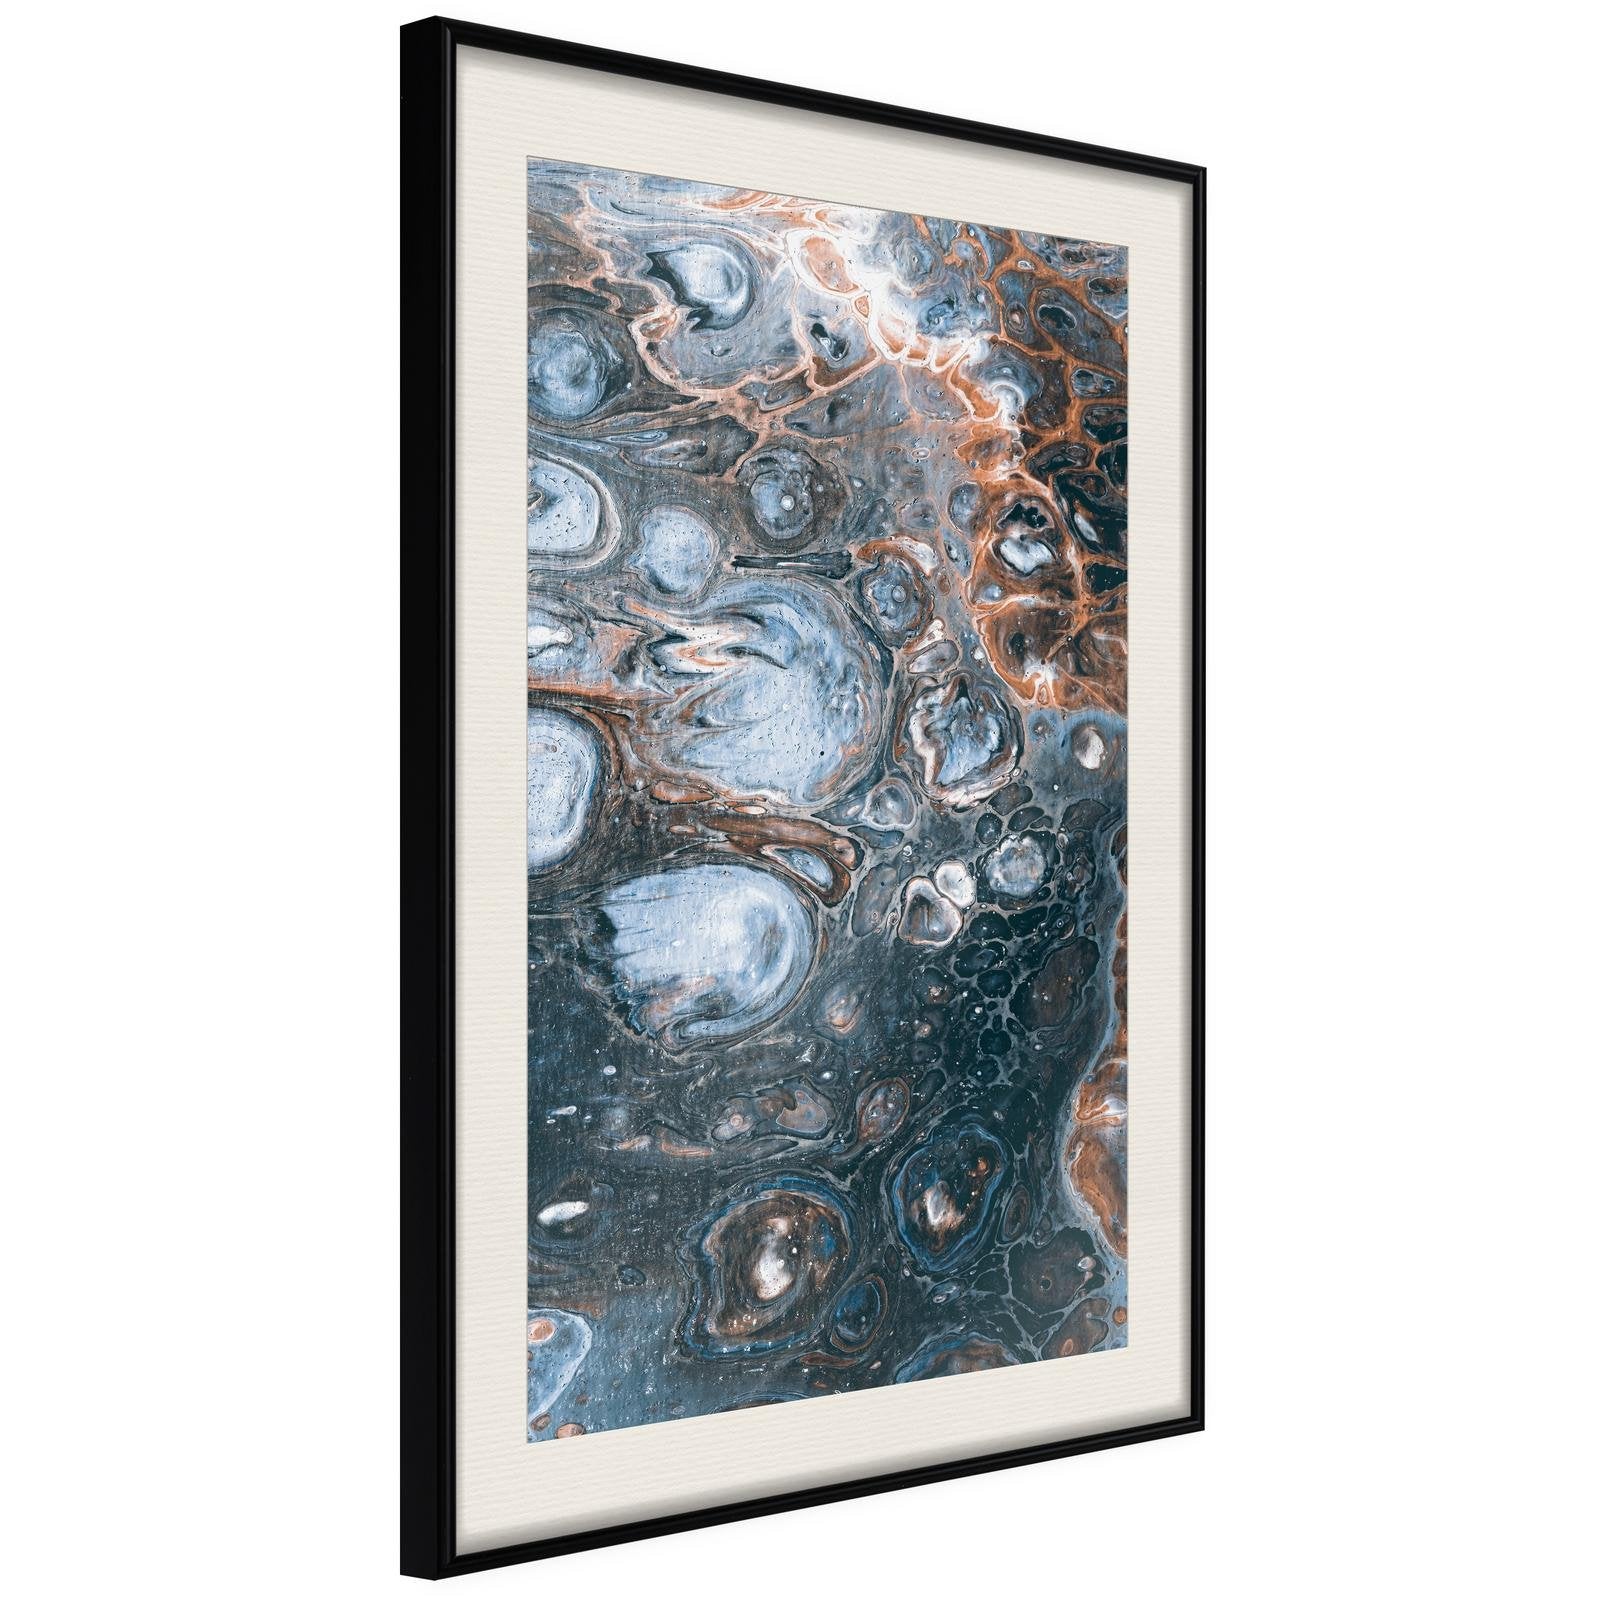 Inramad Poster / Tavla - Surface of the Unknown Planet I - 20x30 Svart ram med passepartout